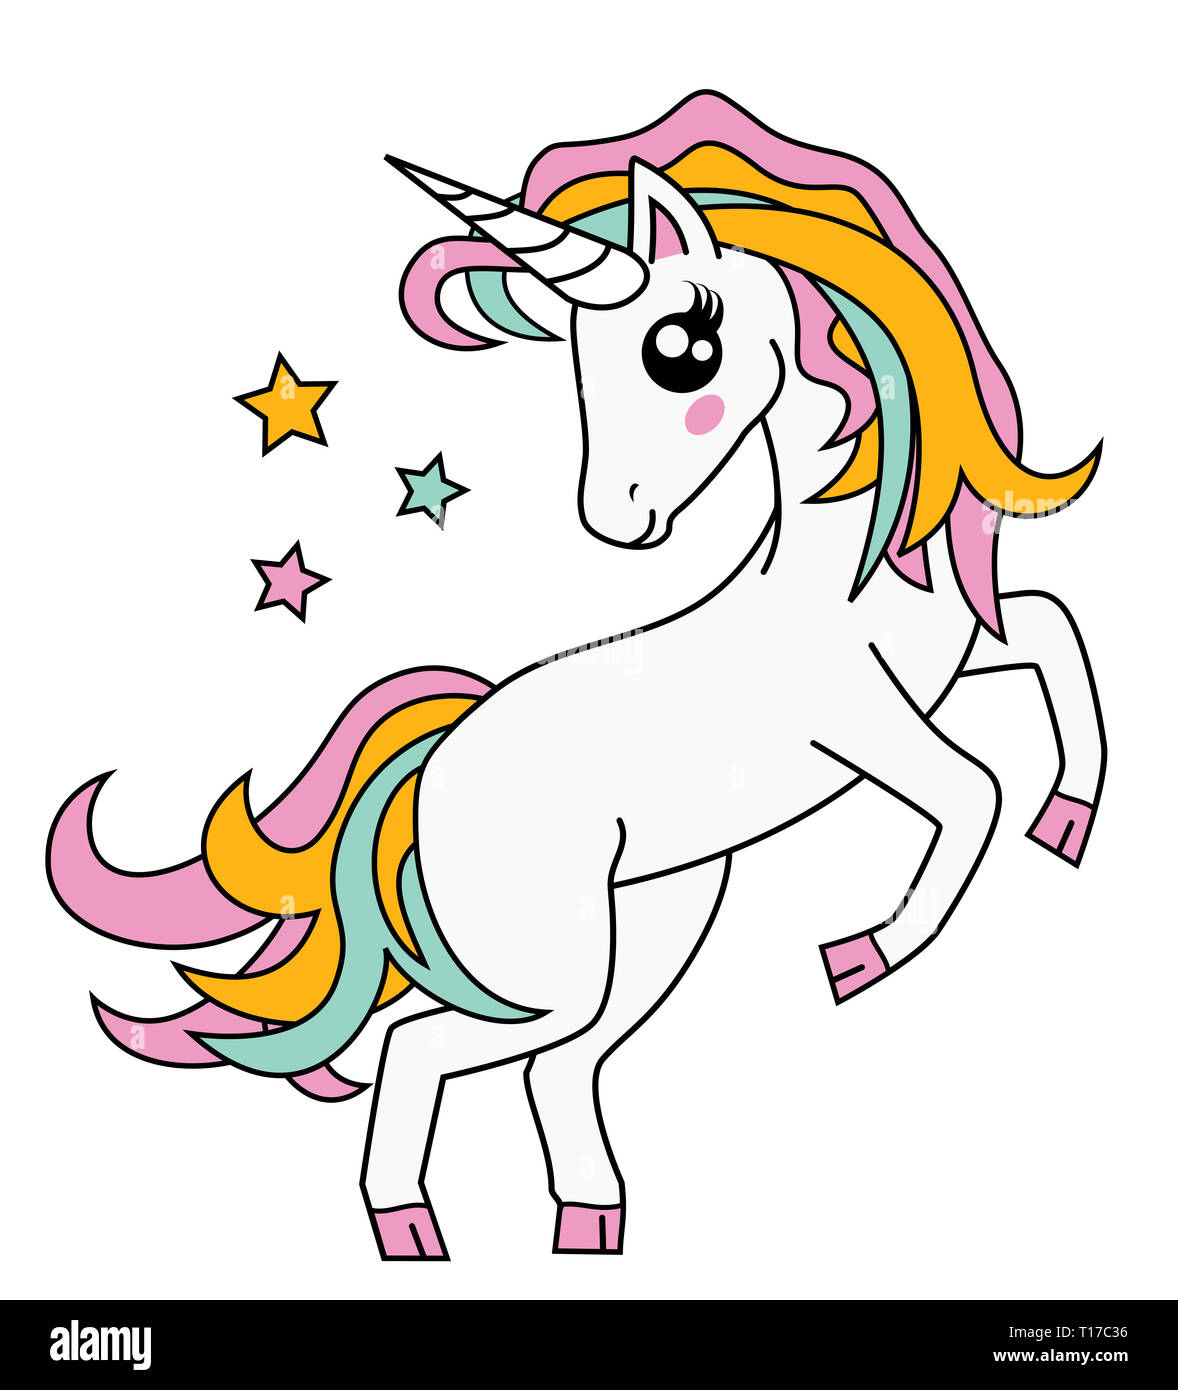 Cute Little Magic Unicorn isolated on white, Vector Illustration. Fairy Tale Character. Fantasy Cartoon Character. Animals And Mythical Creatures. Stock Photo